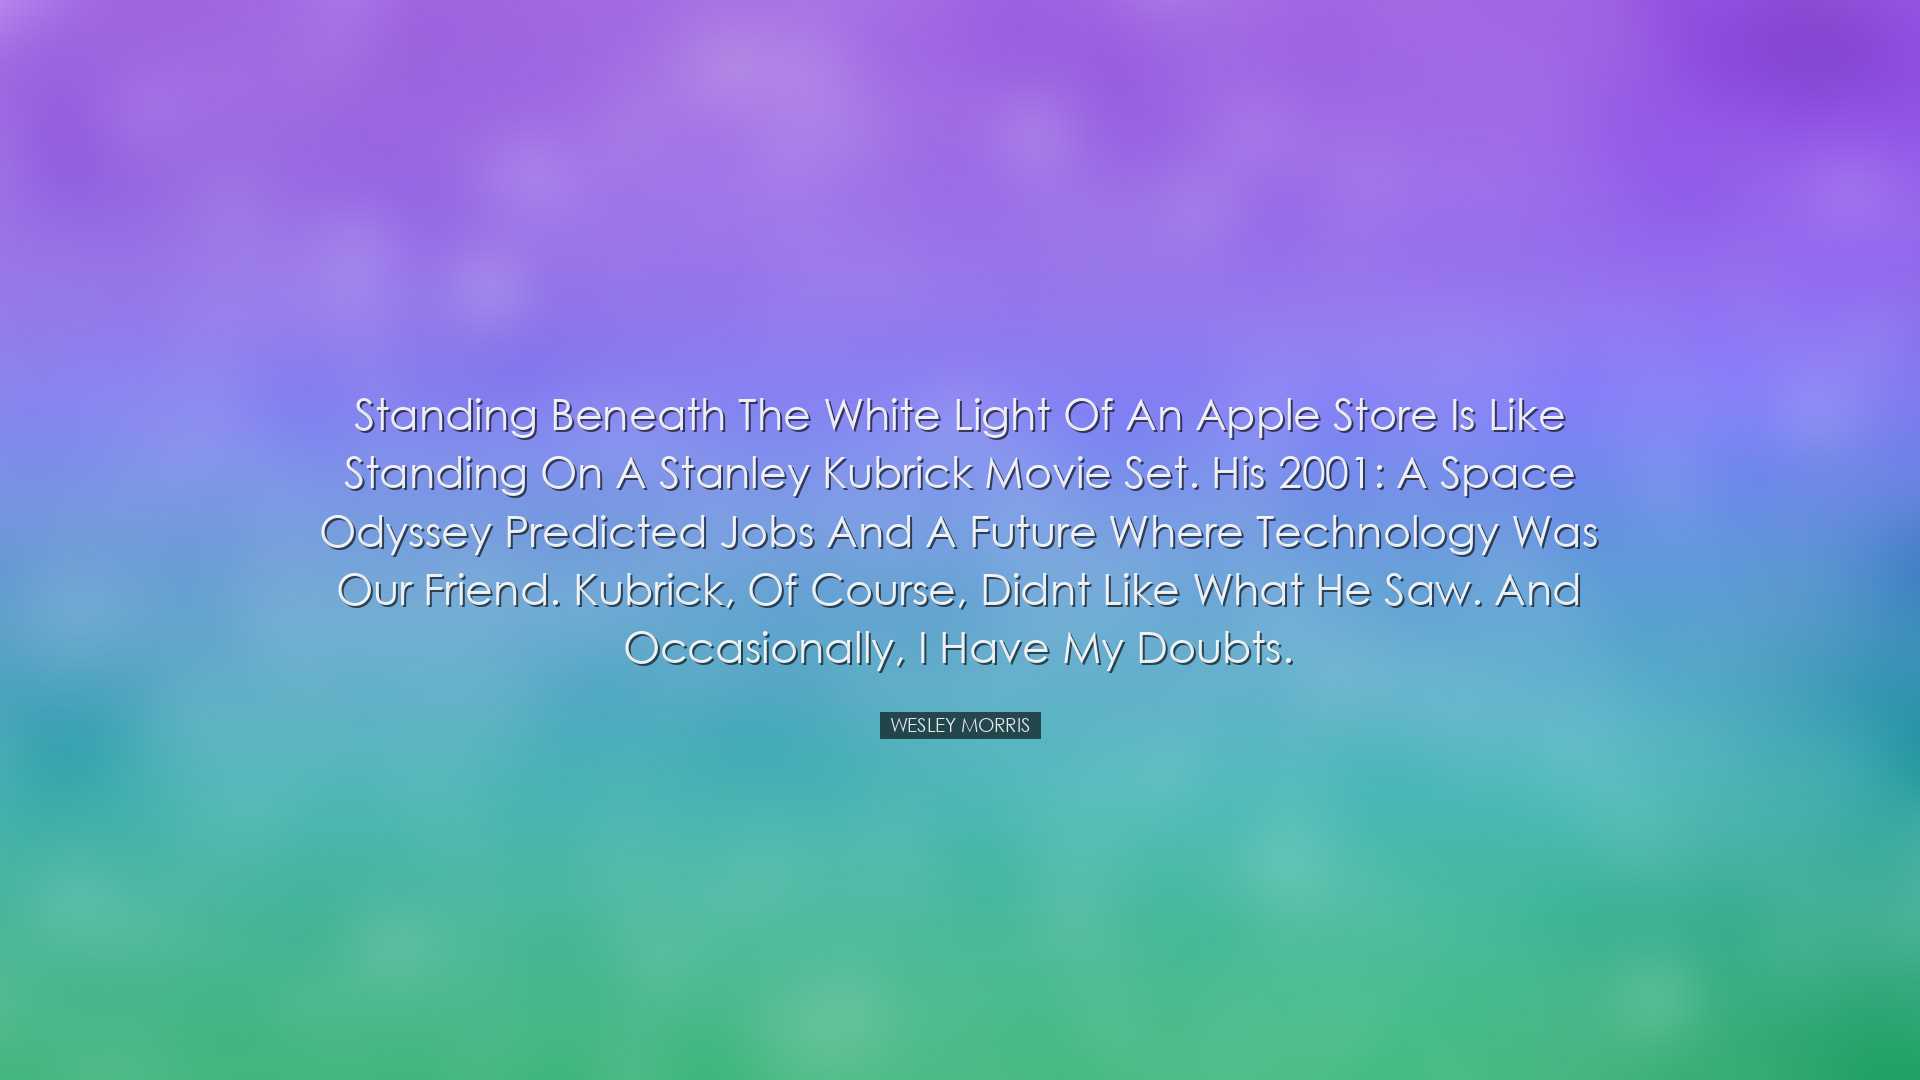 Standing beneath the white light of an Apple store is like standin